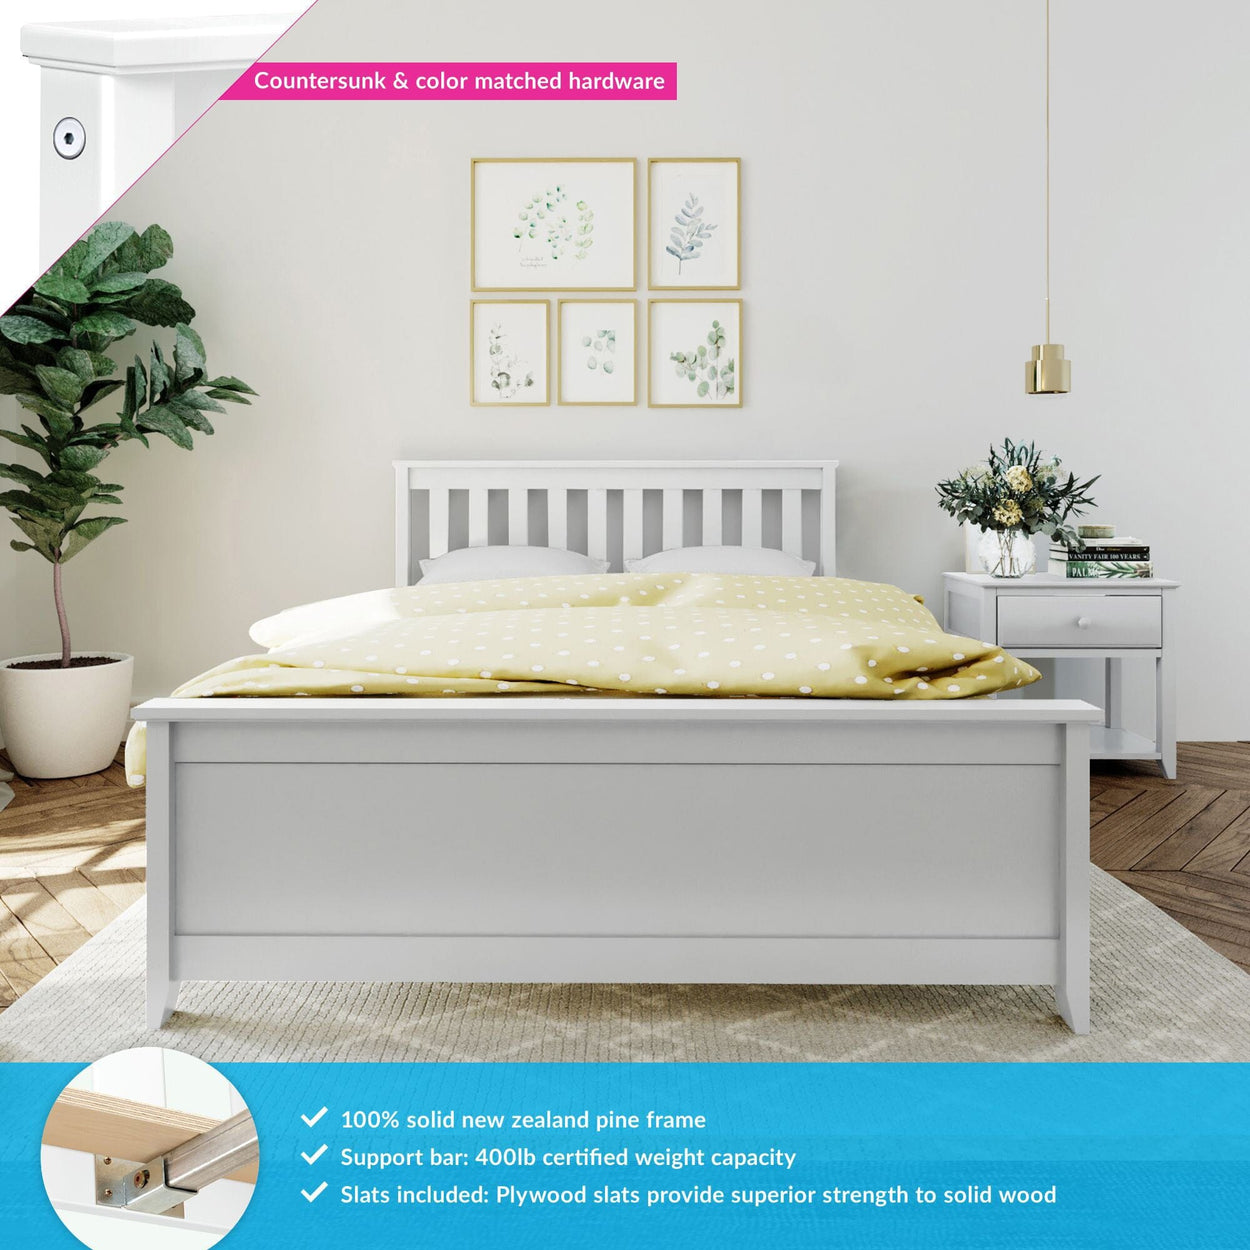 180211-002 : Kids Beds Classic Full-Size Platform Bed, White